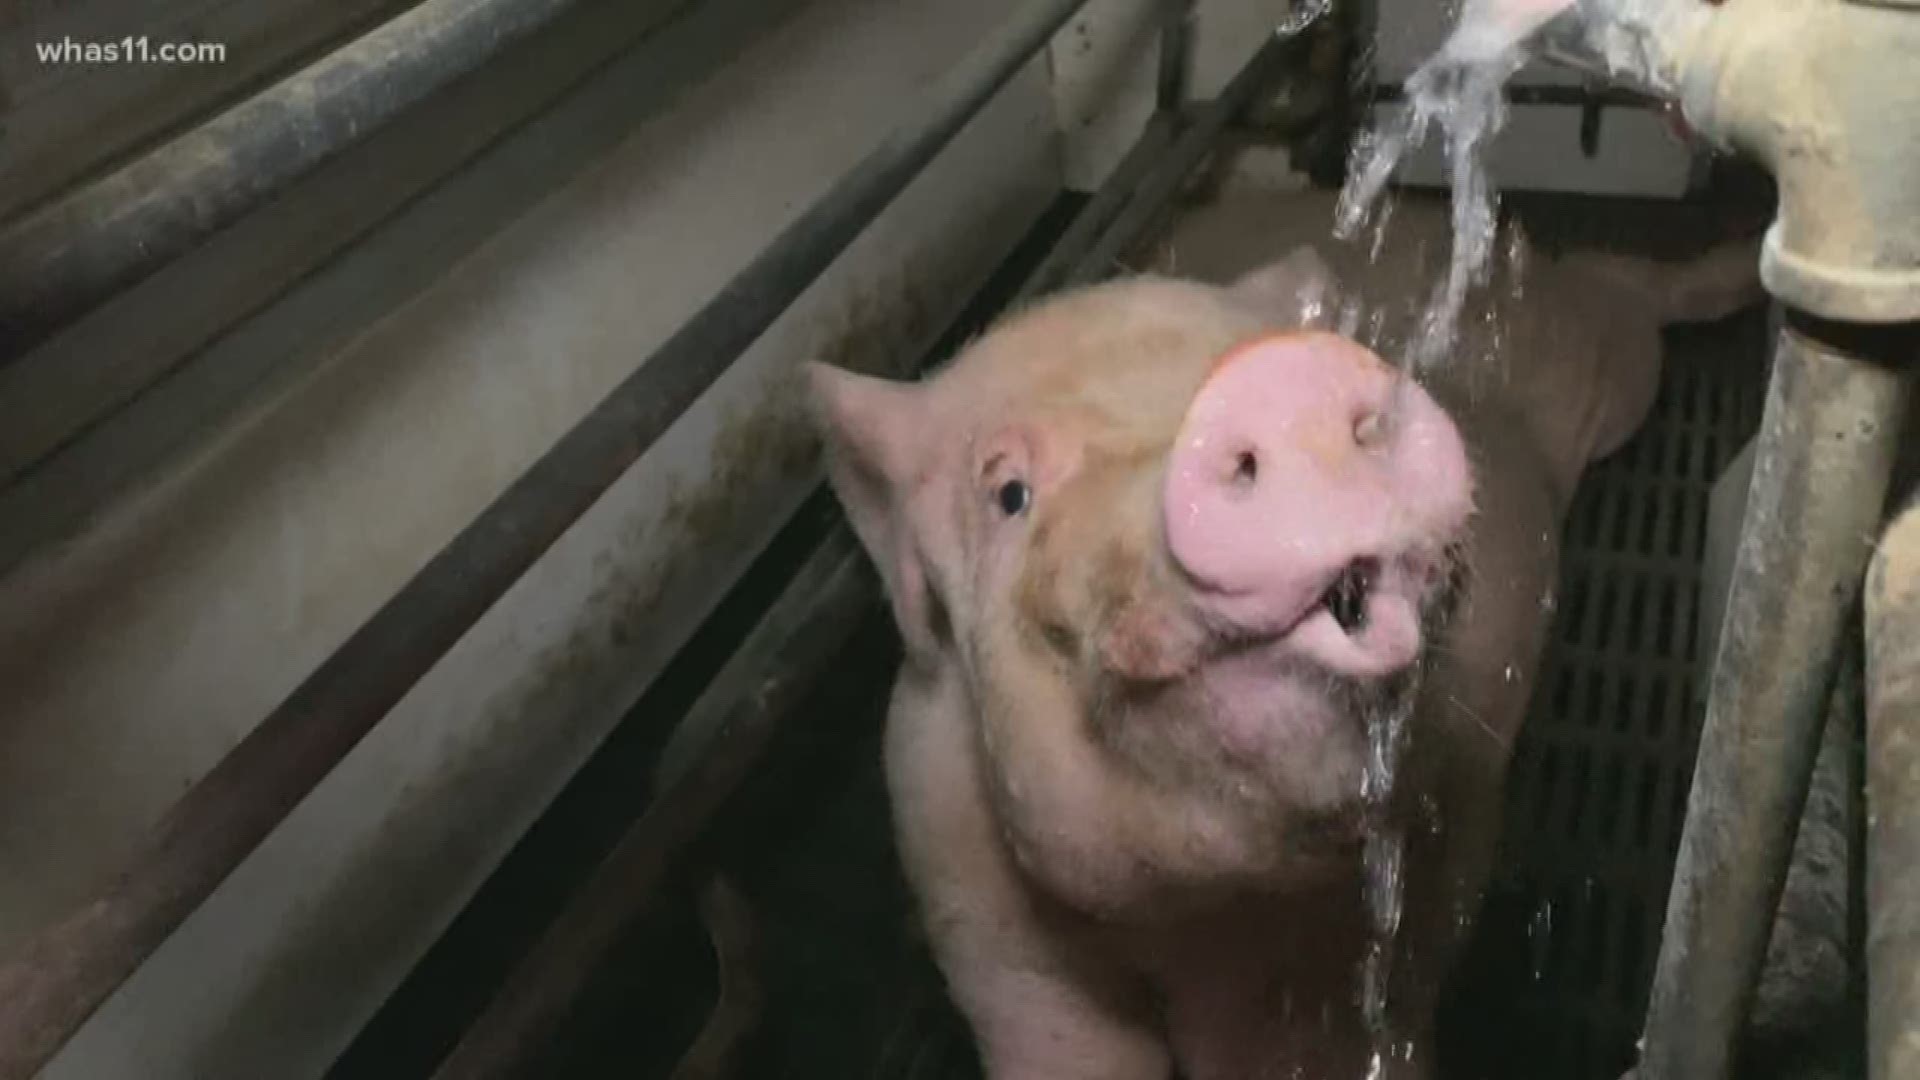 ISP determined that no charges would be filed against the Indiana pig farm after complaint was made by PETA.